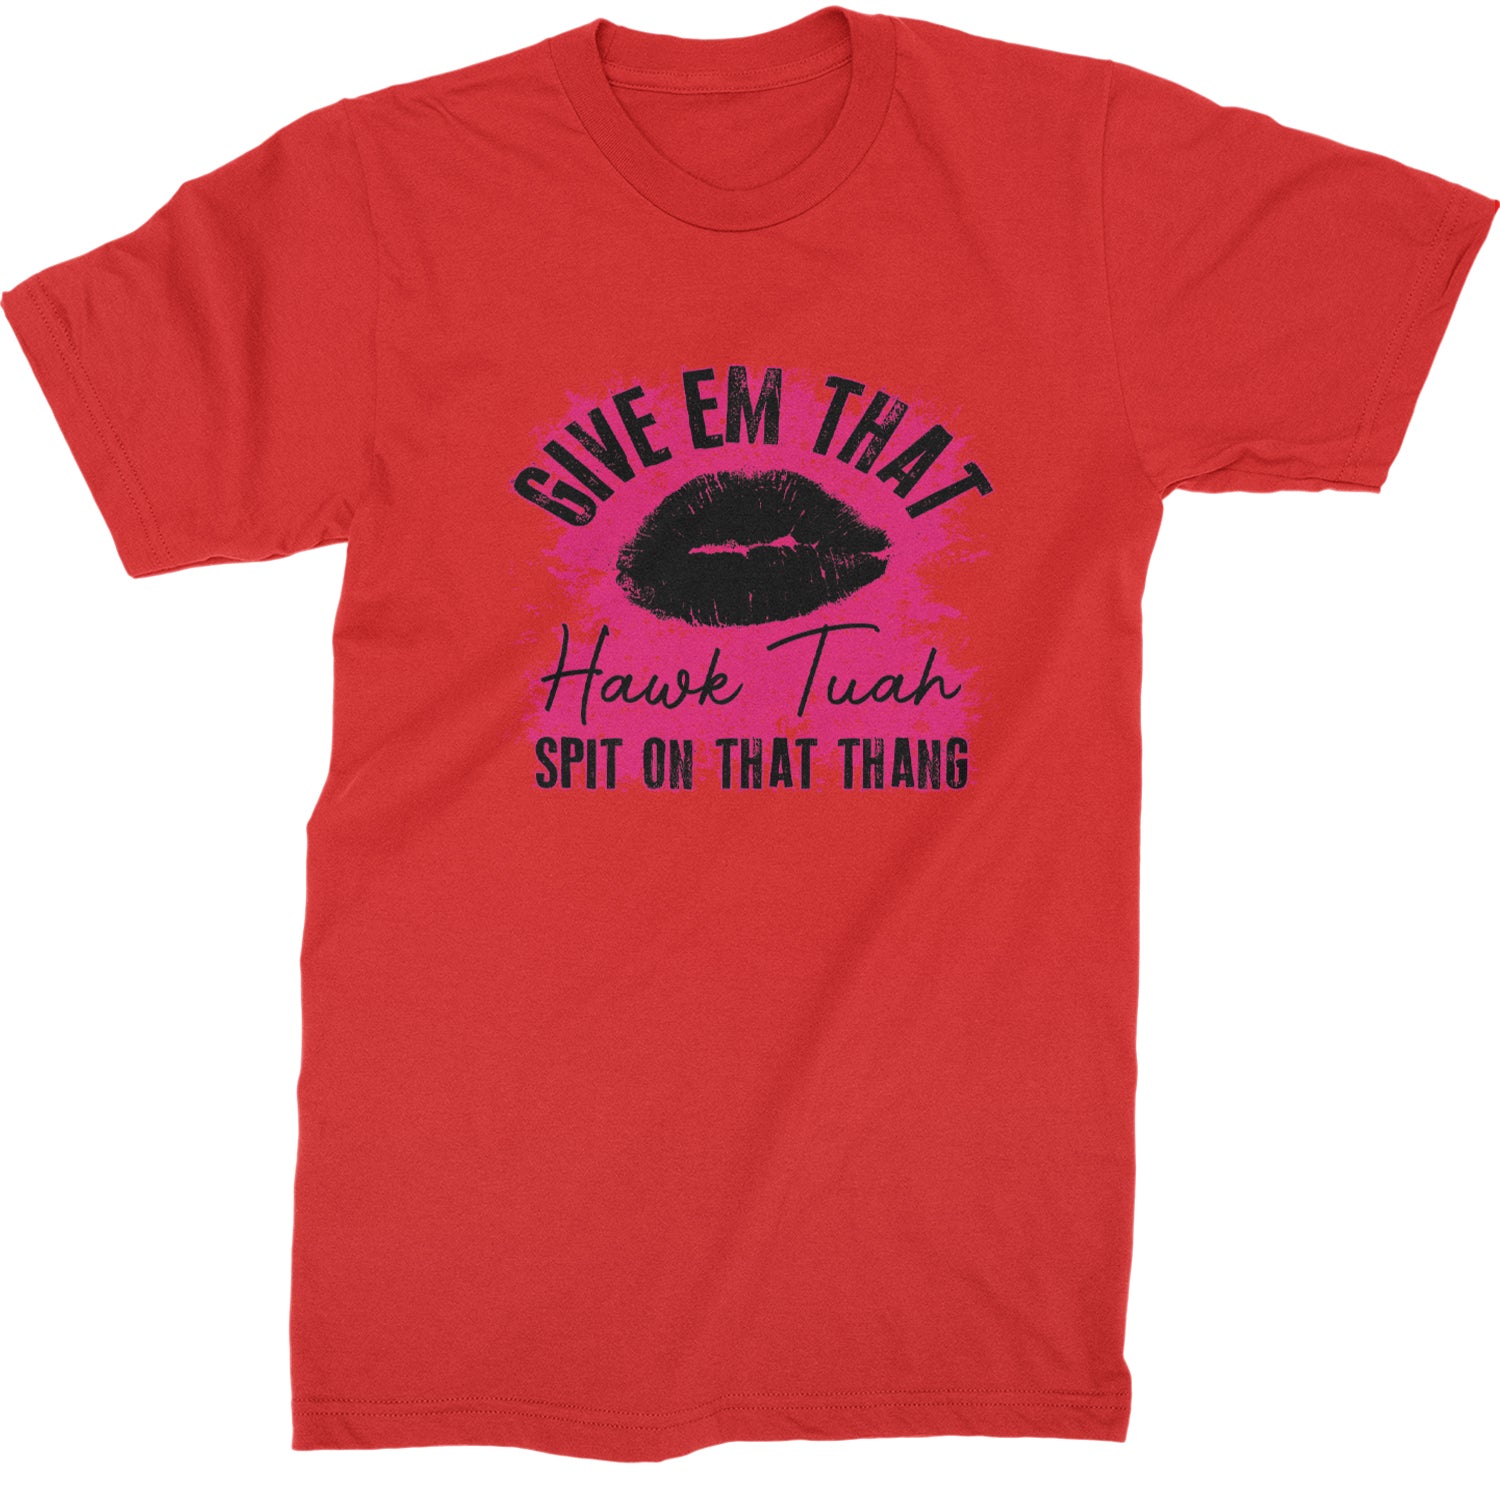 Give 'Em Hawk Tuah Spit On That Thang Mens T-shirt Red